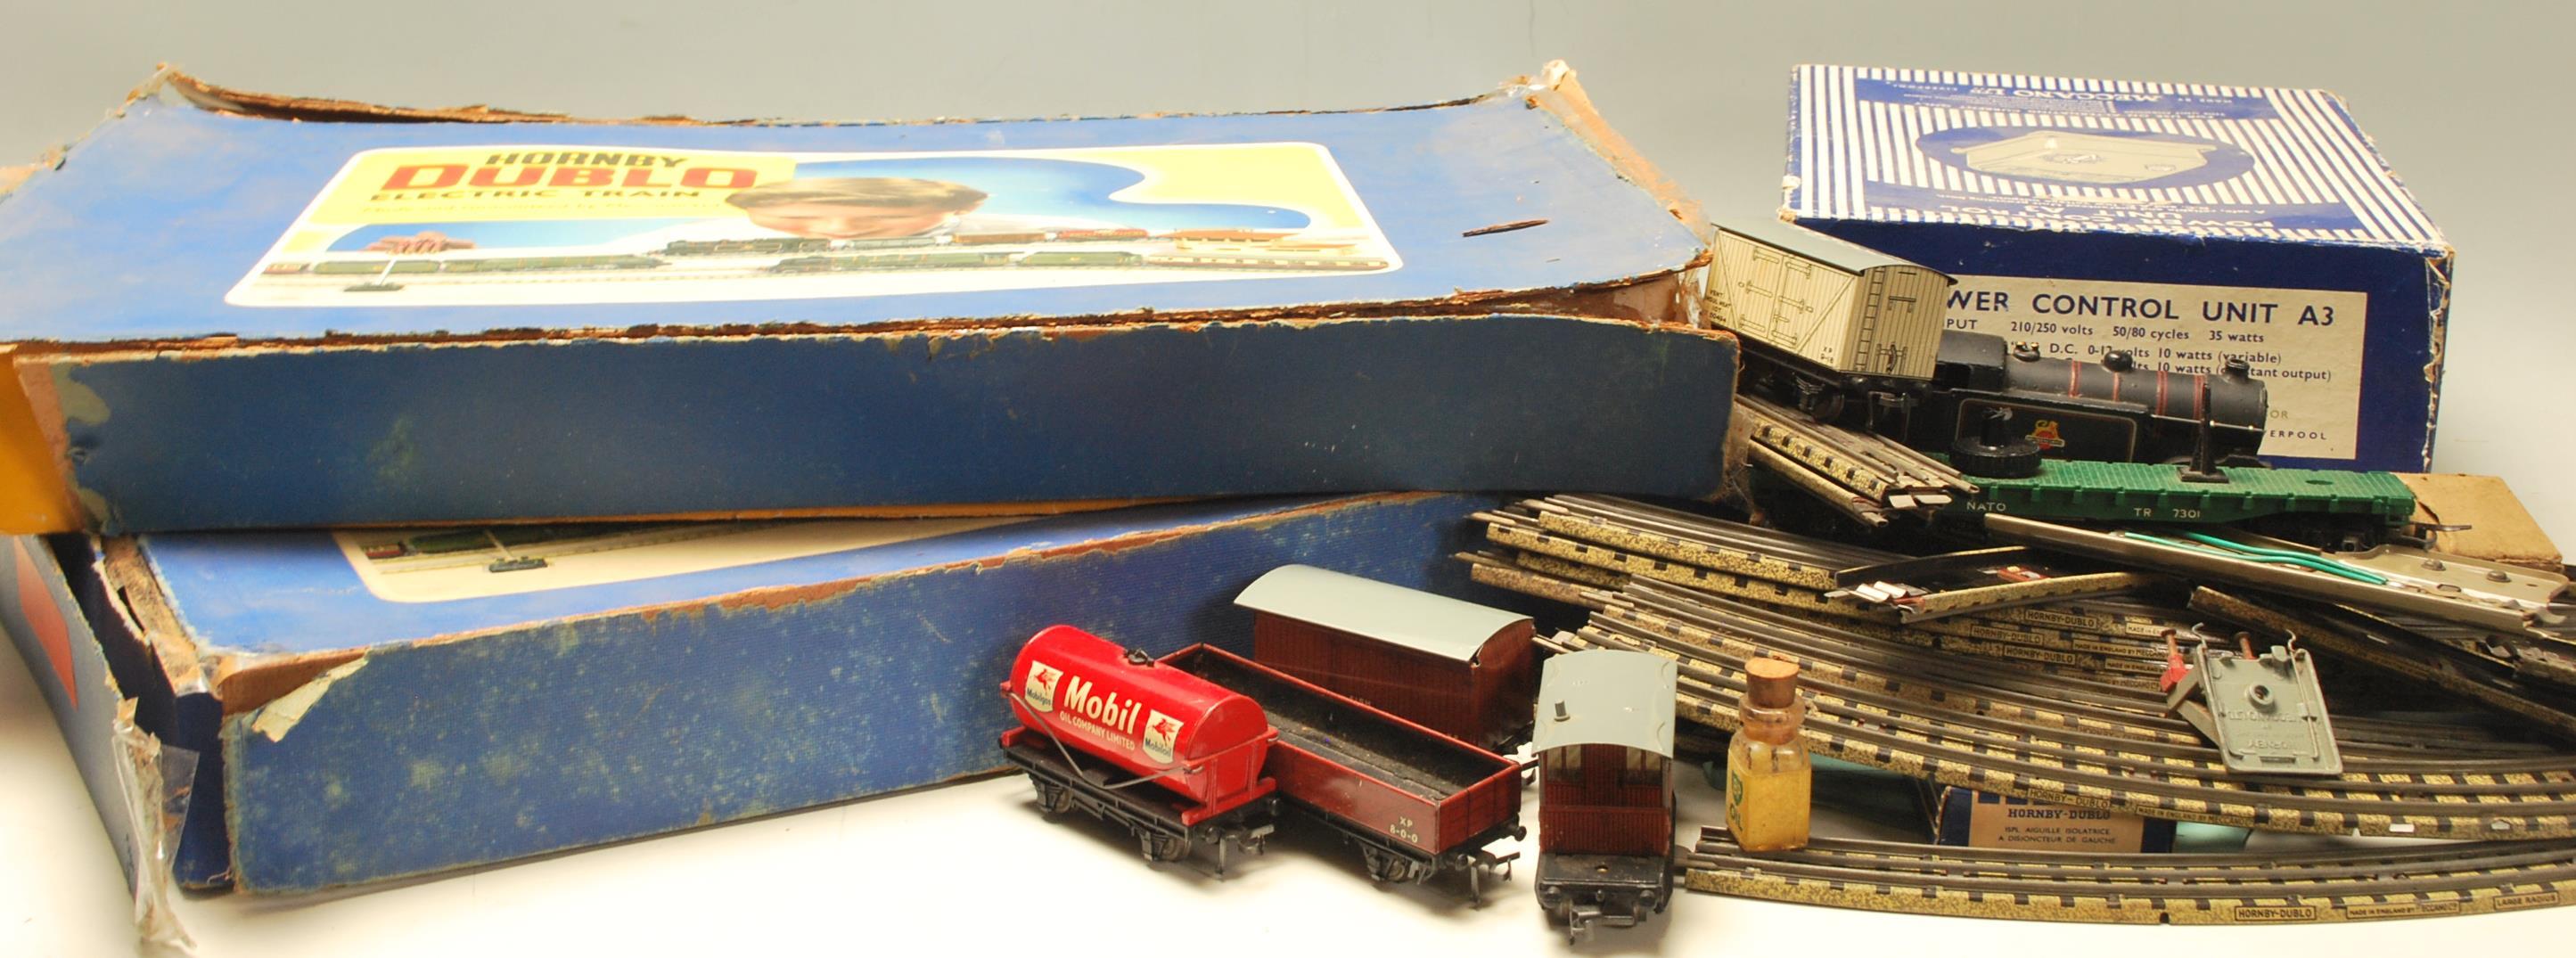 COLLECTION OF ORIGINAL HORNBY DUBLO TRAIN SETS - Image 11 of 16